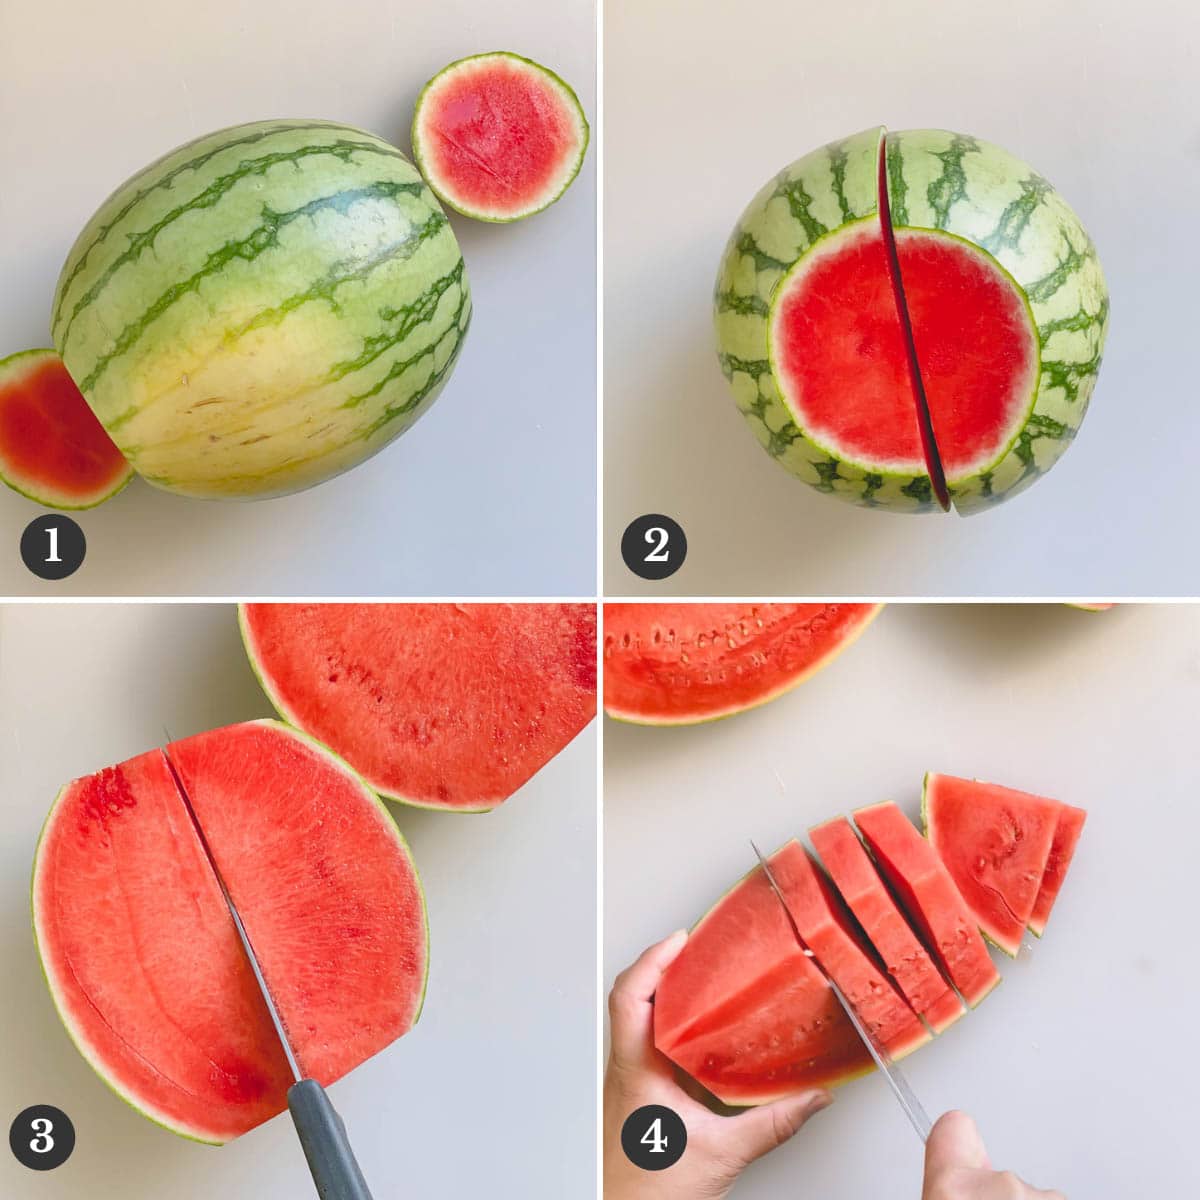 Step by step photos of cutting a watermelon into wedges.